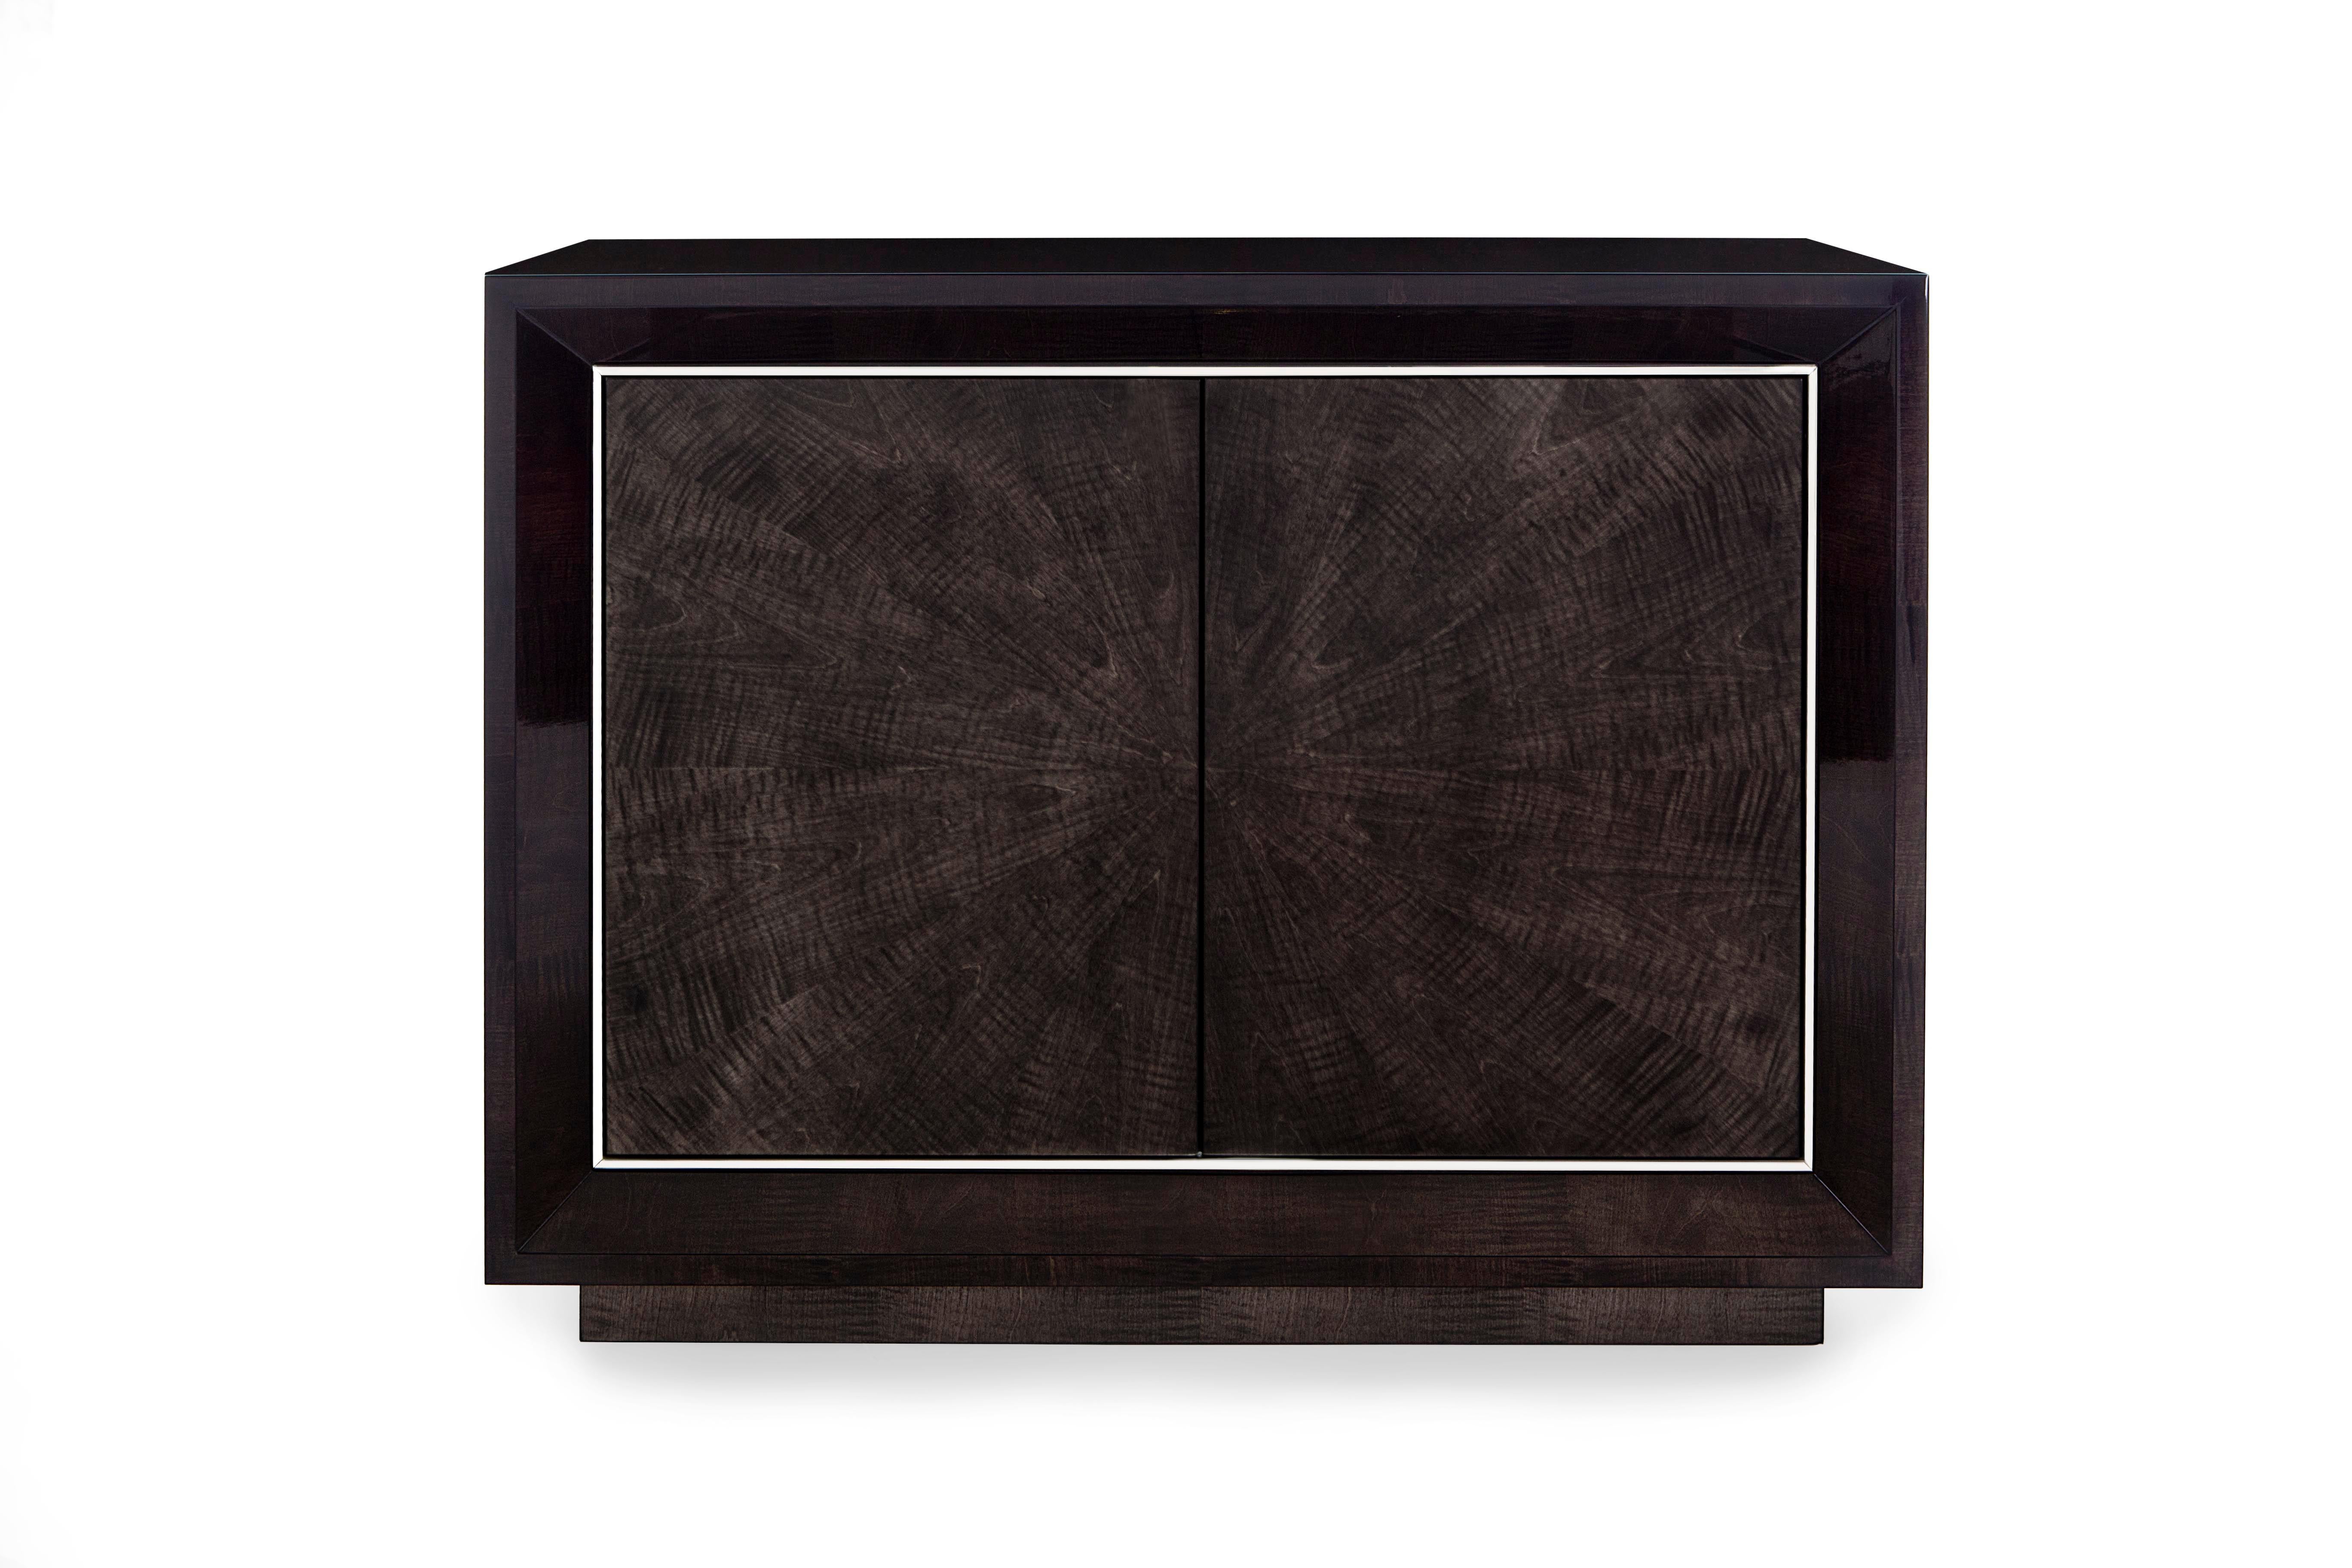 British Davidson's Modern, Chiltern Side Cabinet, in Sycamore Black and Polished Nickel